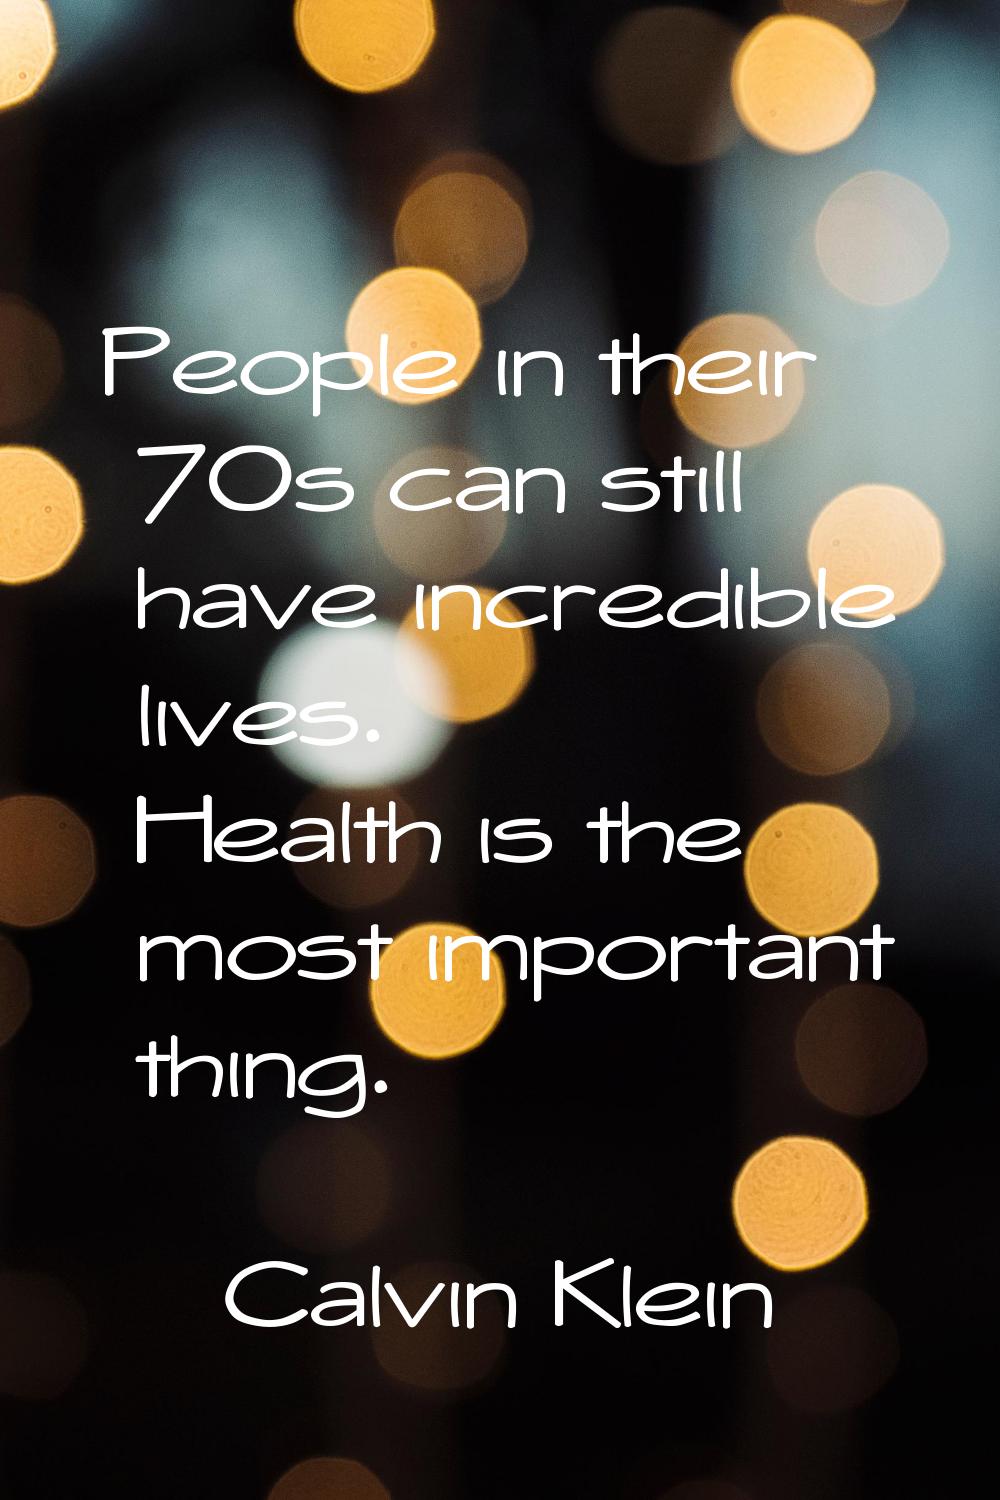 People in their 70s can still have incredible lives. Health is the most important thing.